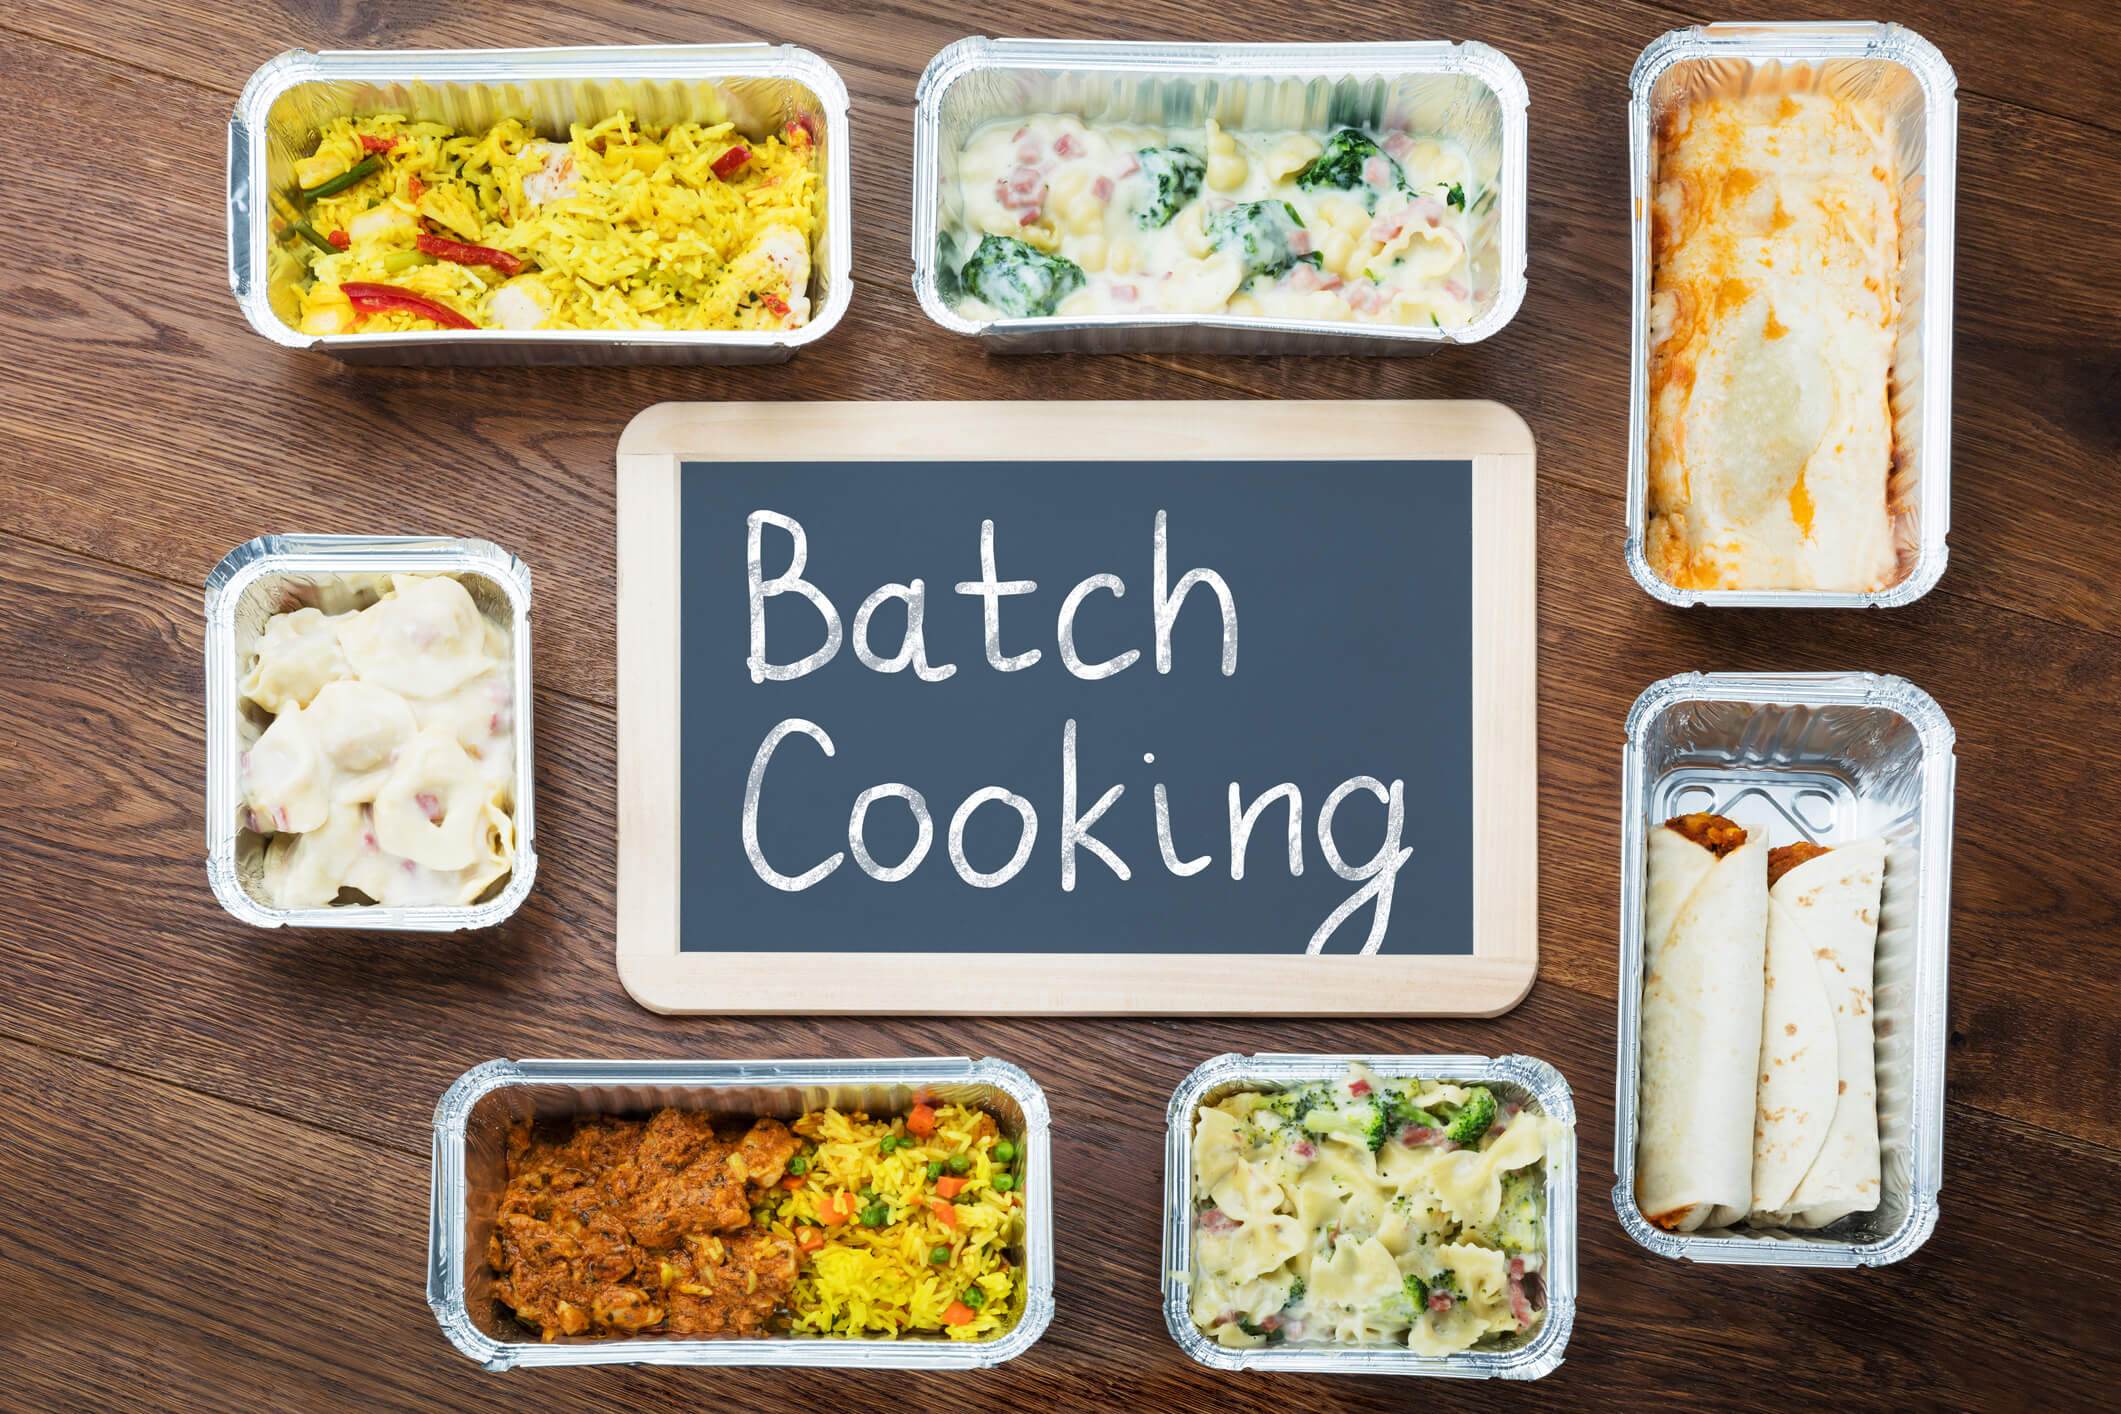 Batch Cooking Text Written On Slate With Take Away Dishes